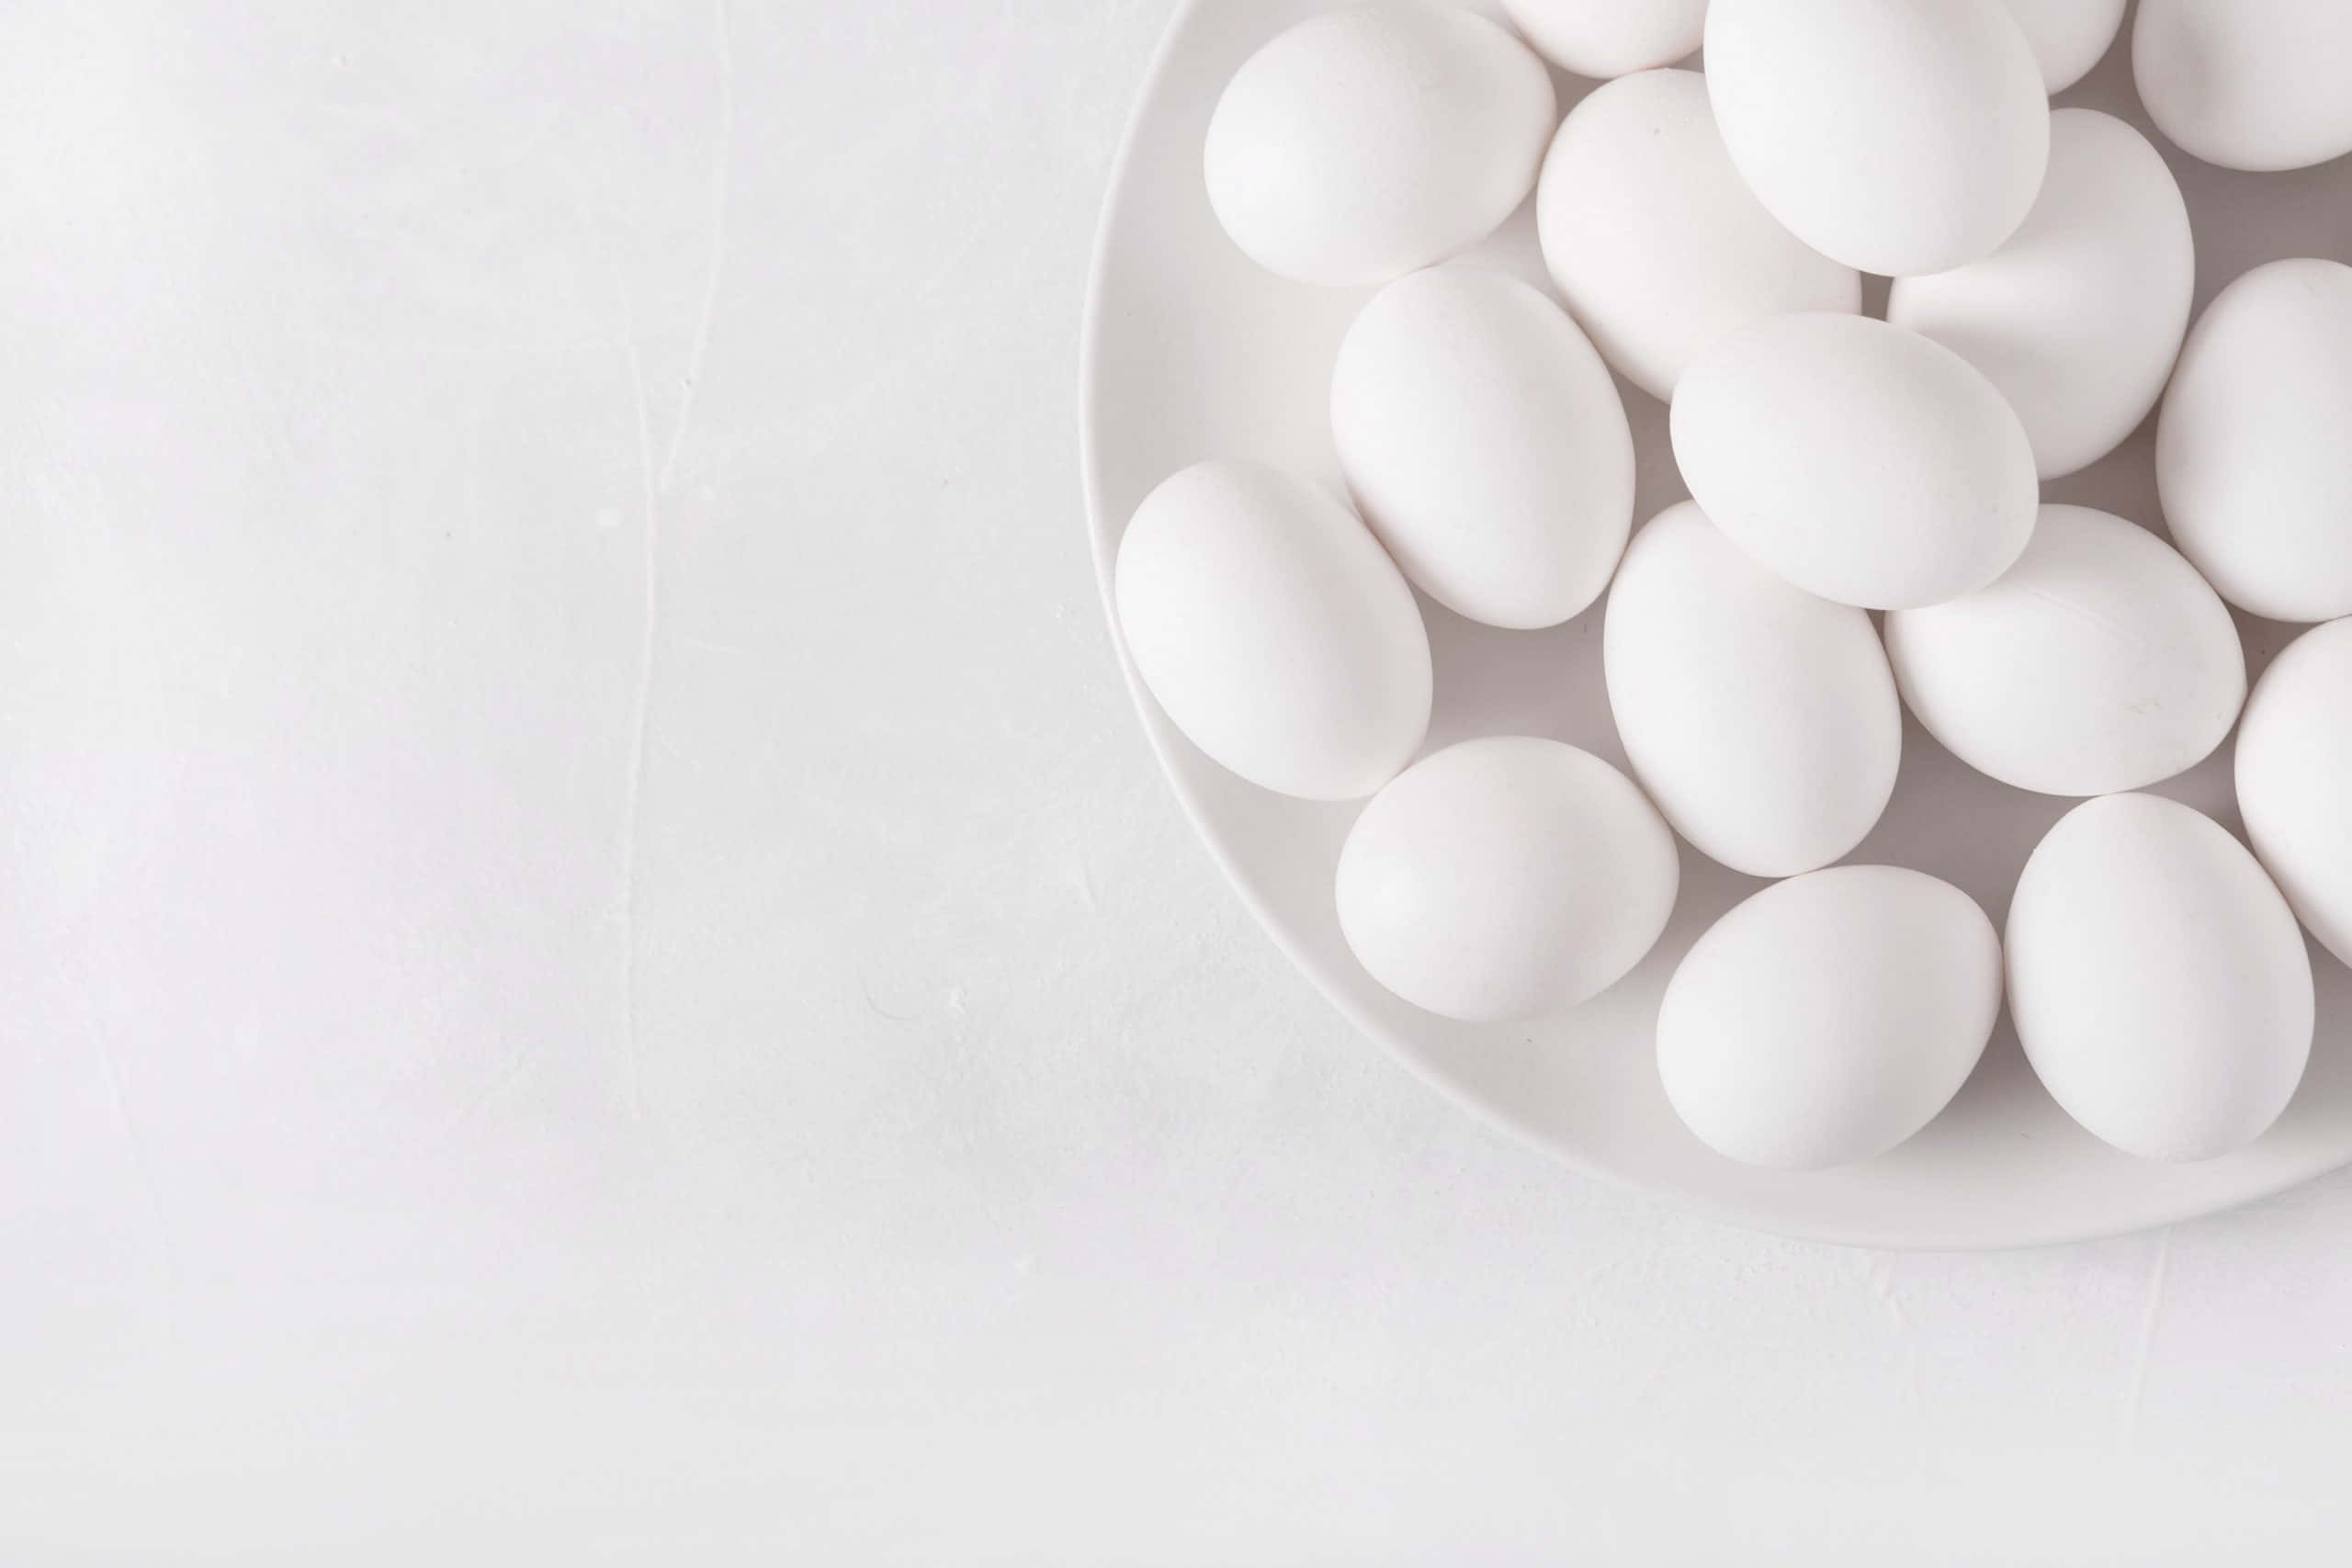 Nutrition-packed egg whites are part of a balanced diet Wallpaper